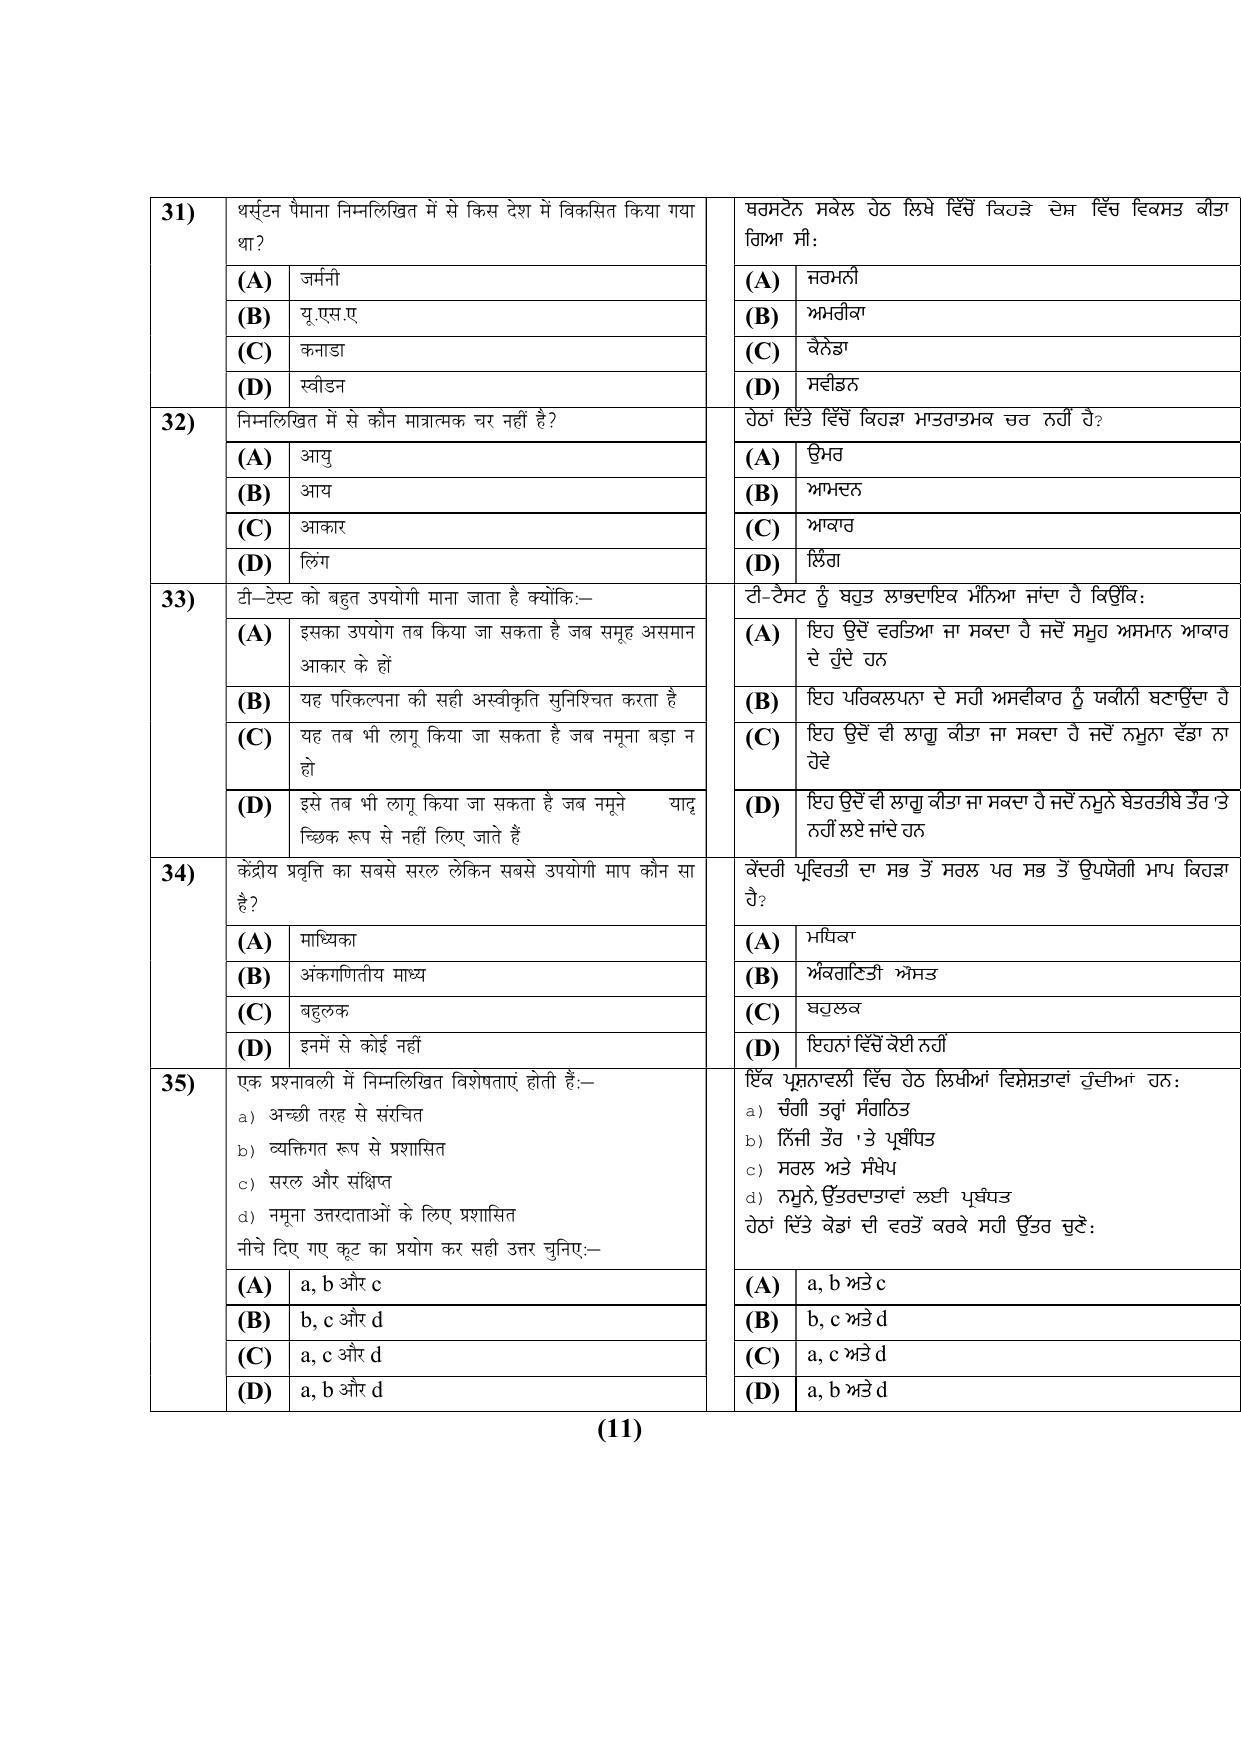 PU MPET Ancient Indian History & Archeology 2022 Question Papers - Page 49